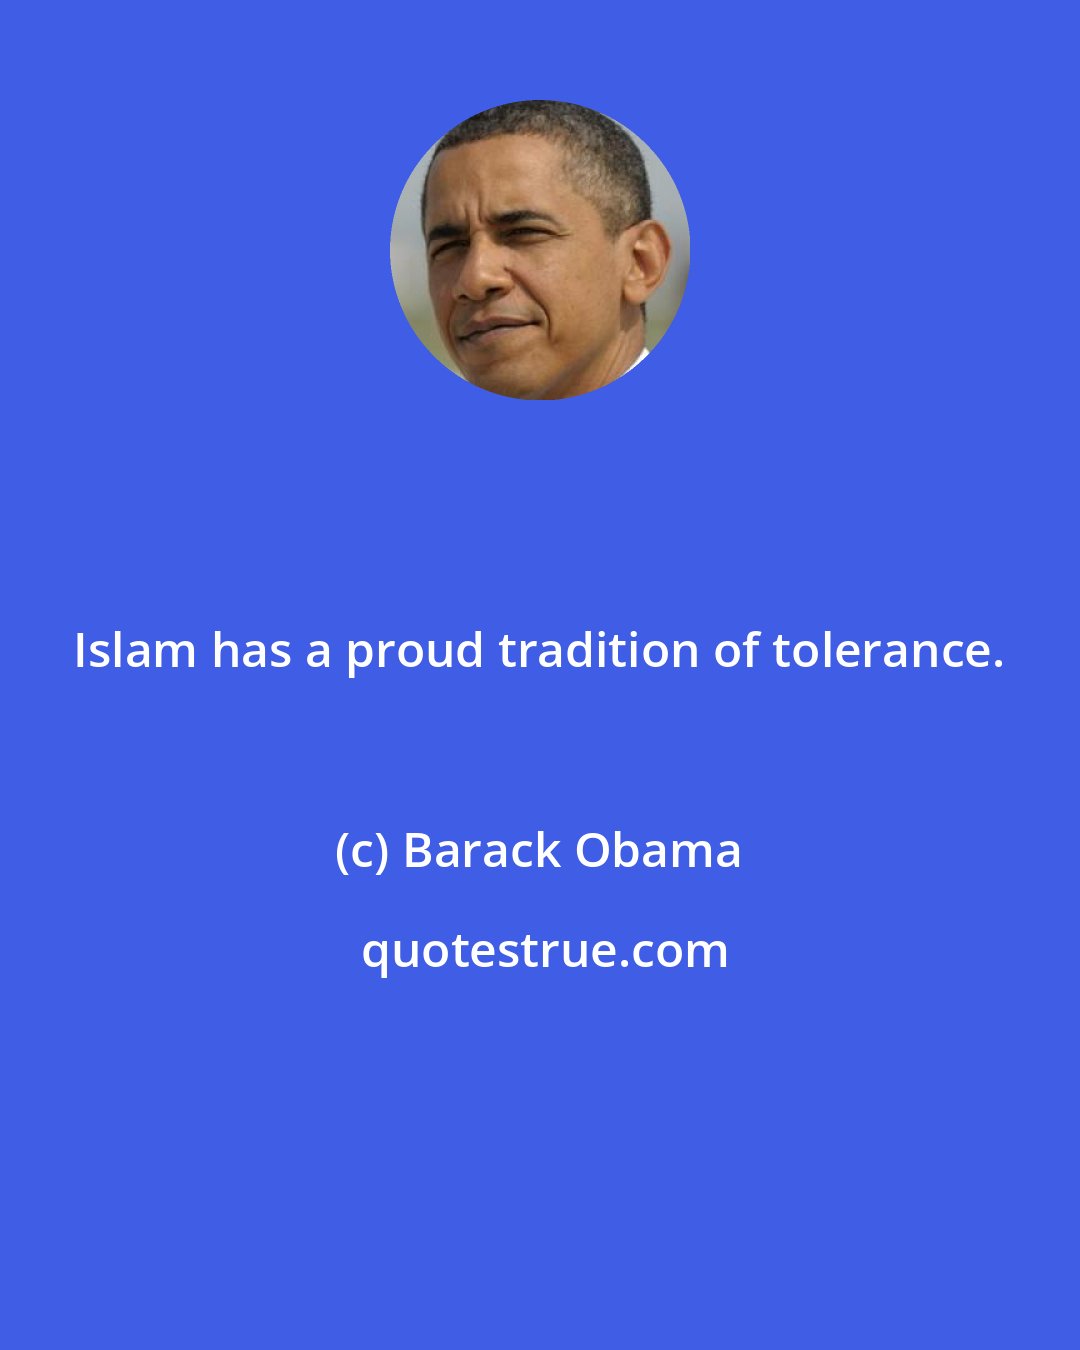 Barack Obama: Islam has a proud tradition of tolerance.